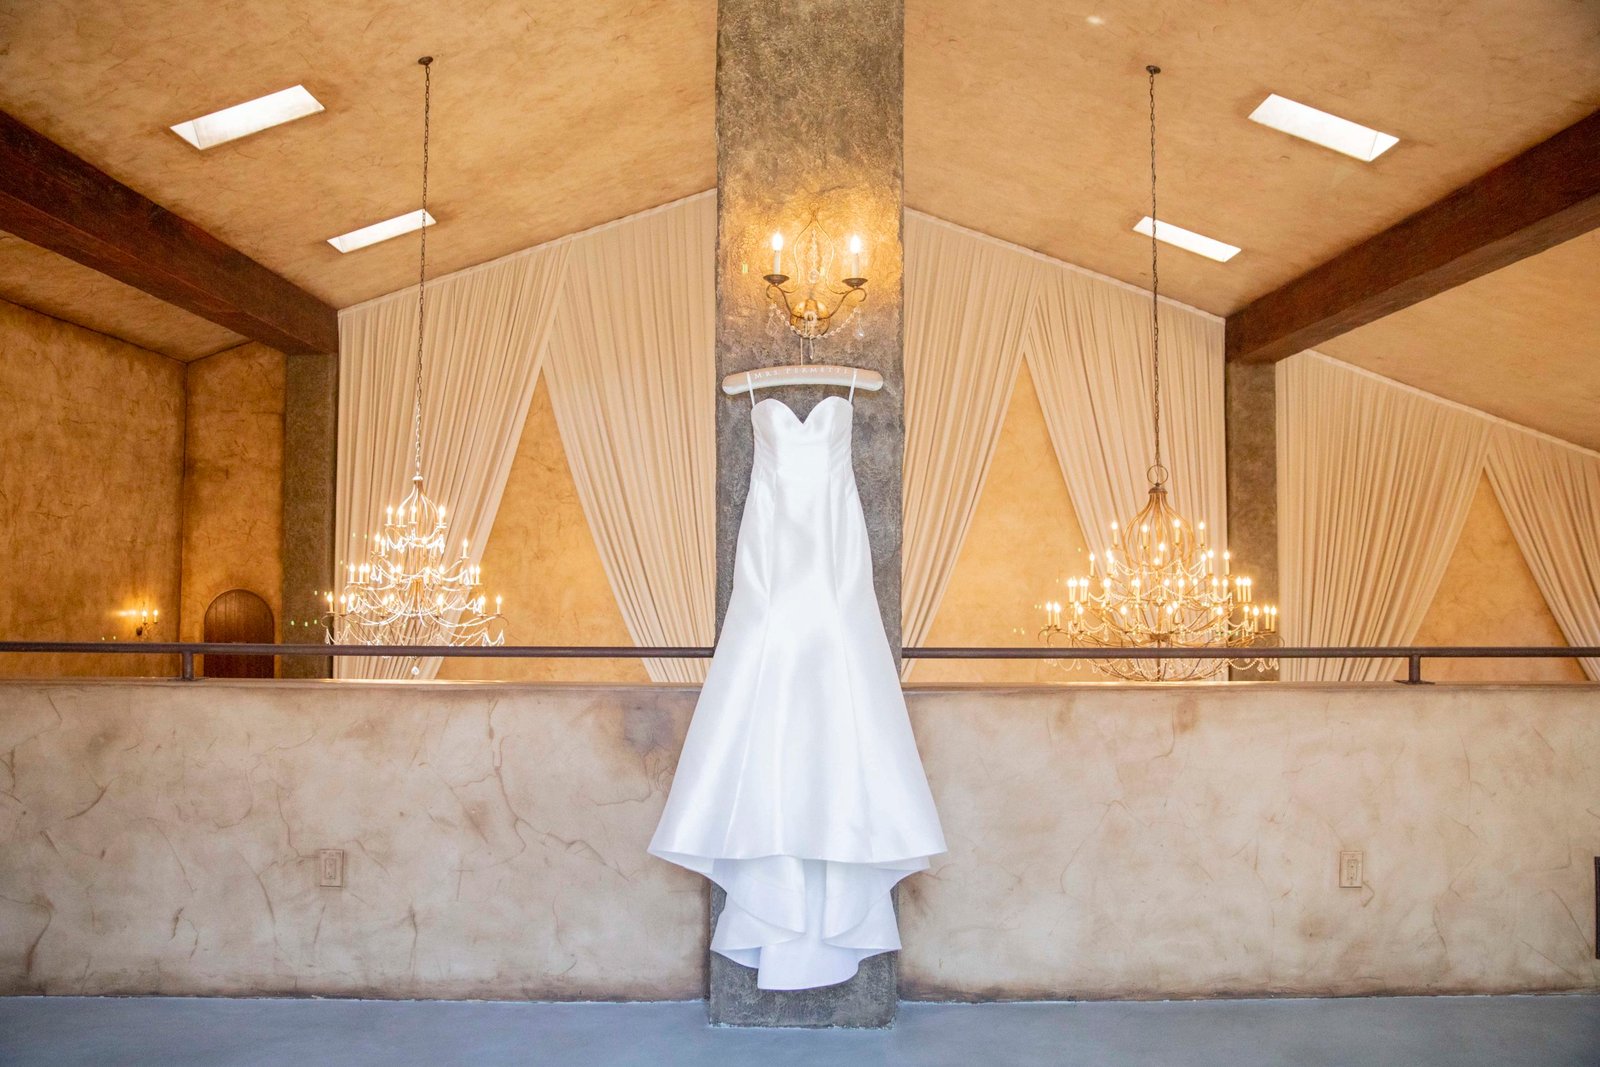 wedding dress hanging in a balcony from a wall light